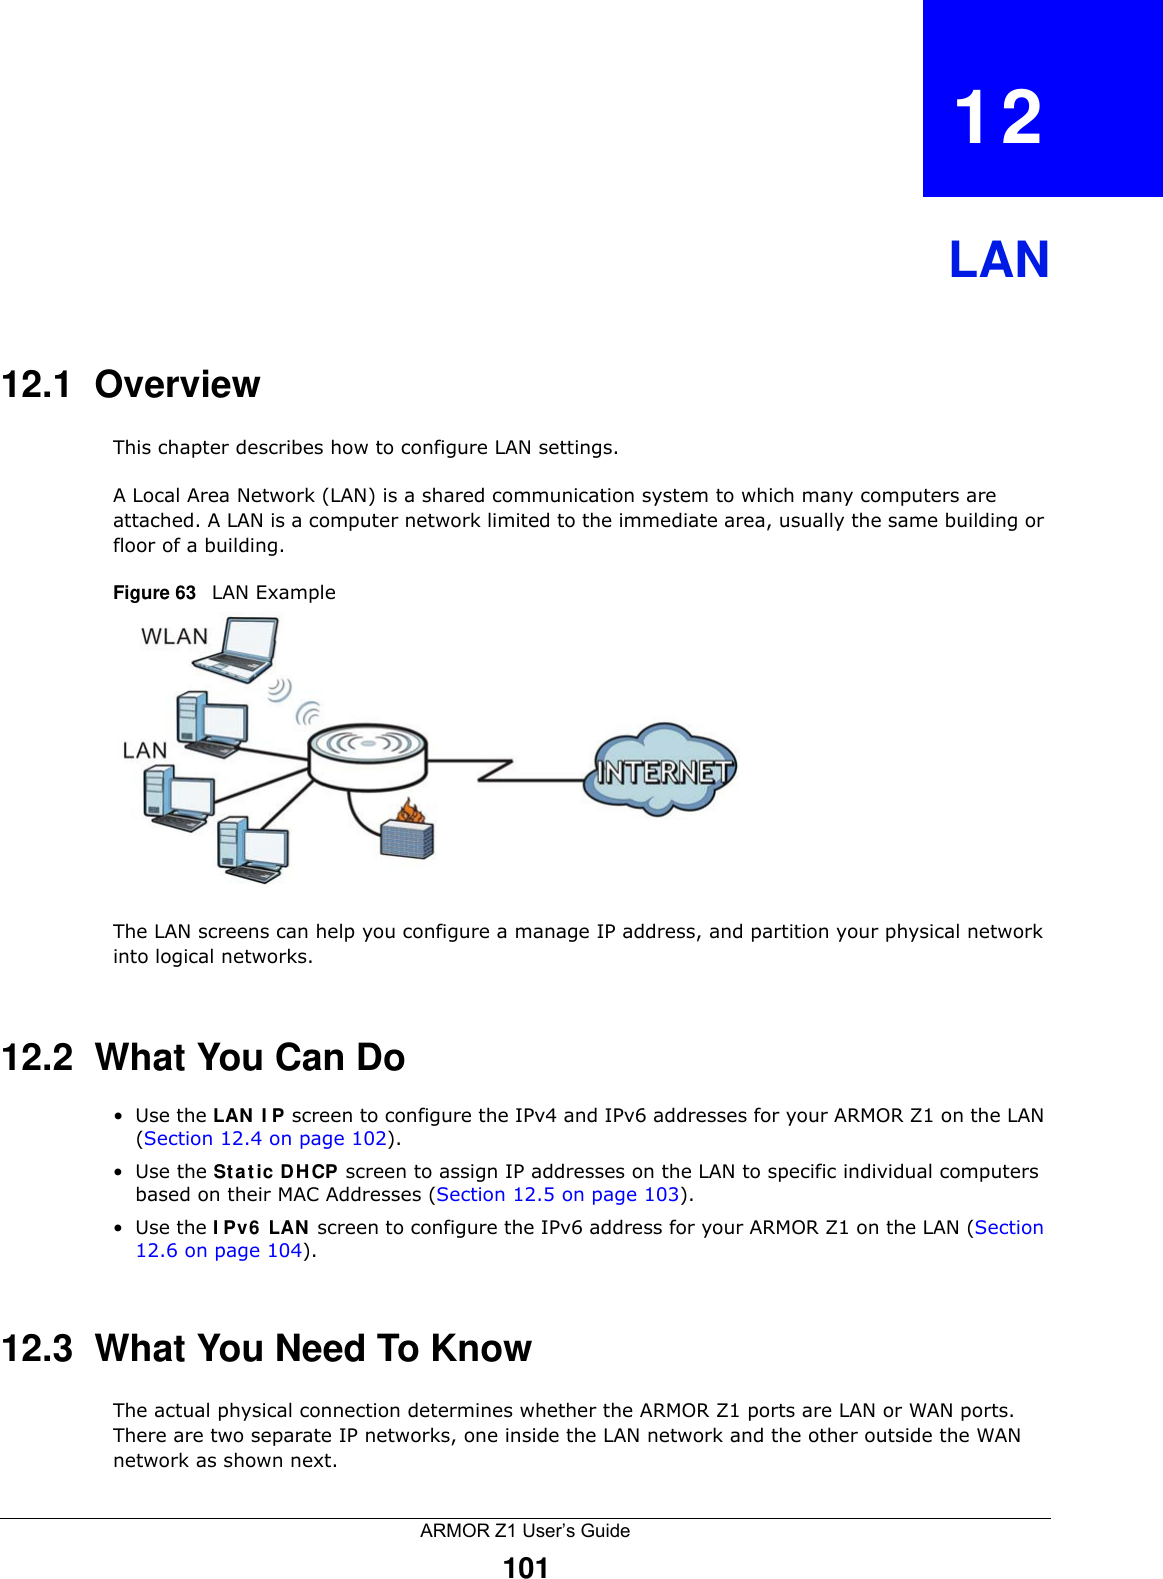 ARMOR Z1 User’s Guide101CHAPTER   12LAN12.1  OverviewThis chapter describes how to configure LAN settings.A Local Area Network (LAN) is a shared communication system to which many computers are attached. A LAN is a computer network limited to the immediate area, usually the same building or floor of a building. Figure 63   LAN ExampleThe LAN screens can help you configure a manage IP address, and partition your physical network into logical networks.12.2  What You Can Do•Use the LAN IP screen to configure the IPv4 and IPv6 addresses for your ARMOR Z1 on the LAN (Section 12.4 on page 102).•Use the Static DHCP screen to assign IP addresses on the LAN to specific individual computers based on their MAC Addresses (Section 12.5 on page 103).•Use the IPv6 LAN screen to configure the IPv6 address for your ARMOR Z1 on the LAN (Section 12.6 on page 104).12.3  What You Need To KnowThe actual physical connection determines whether the ARMOR Z1 ports are LAN or WAN ports. There are two separate IP networks, one inside the LAN network and the other outside the WAN network as shown next.